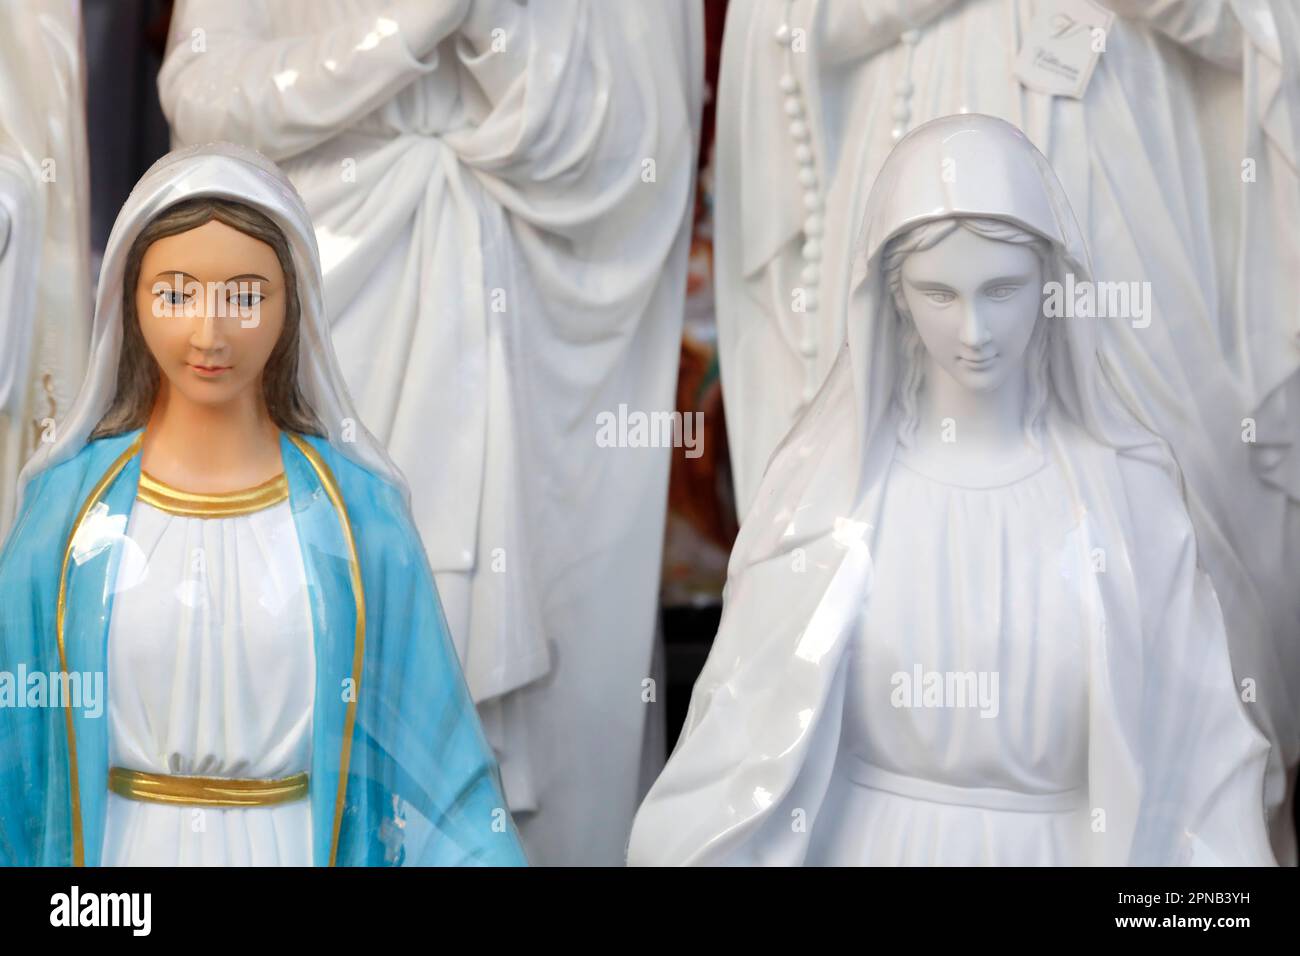 Religious shop. Christian items and souvenirs.  Virgin Mary statues.  Ho Chi Minh City. Vietnam. Stock Photo